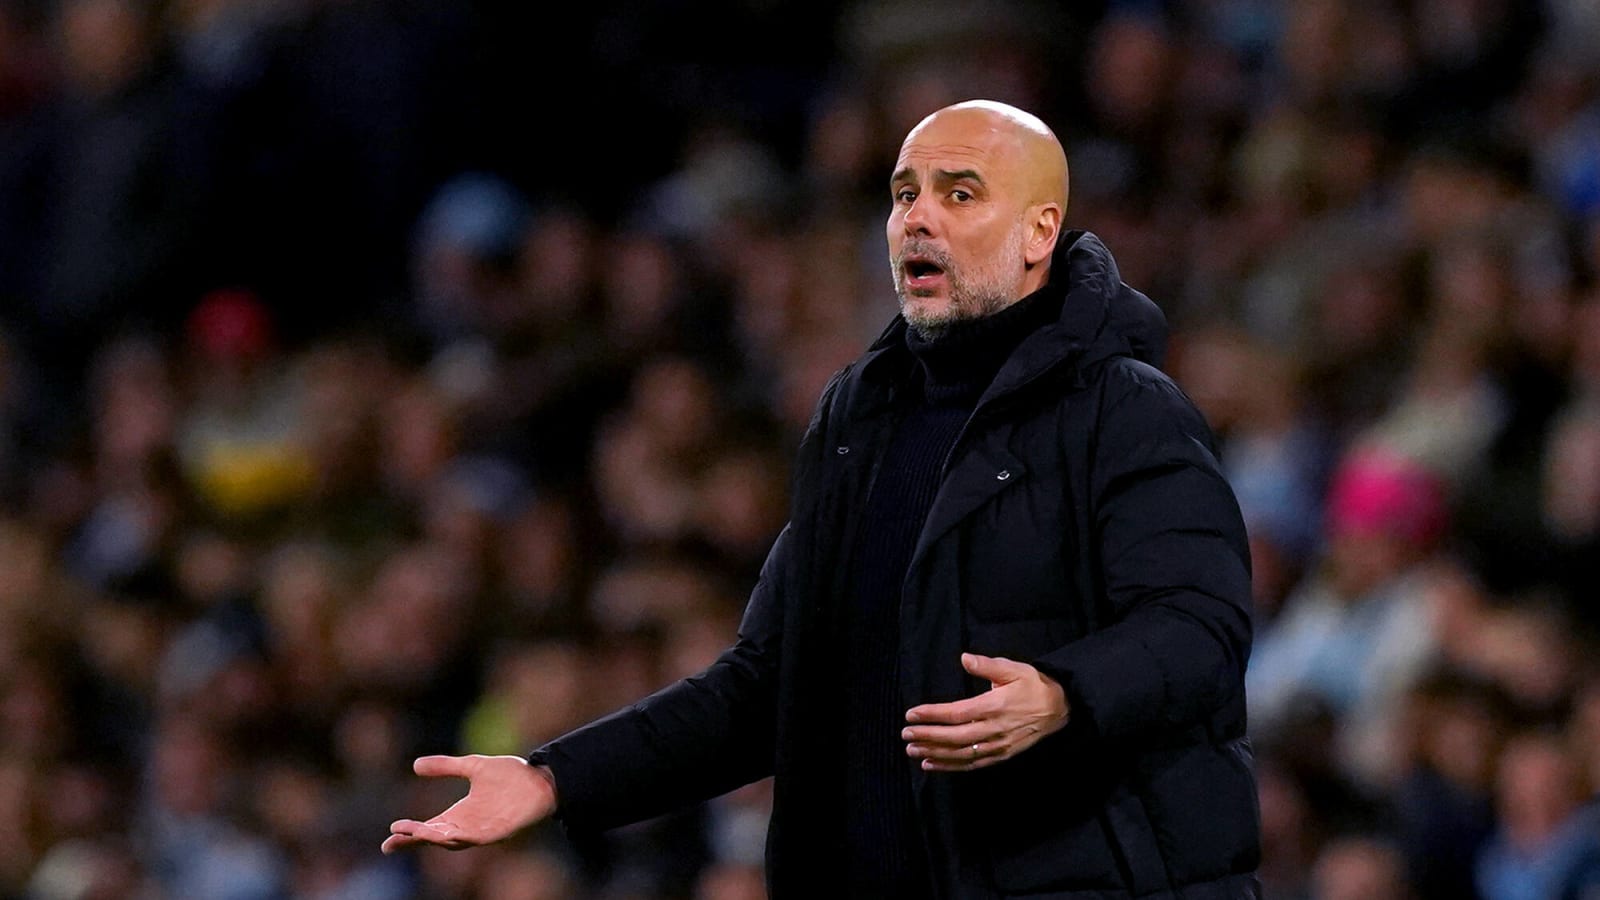 Guardiola expects Arsenal and Liverpool to drop points on the title run-in